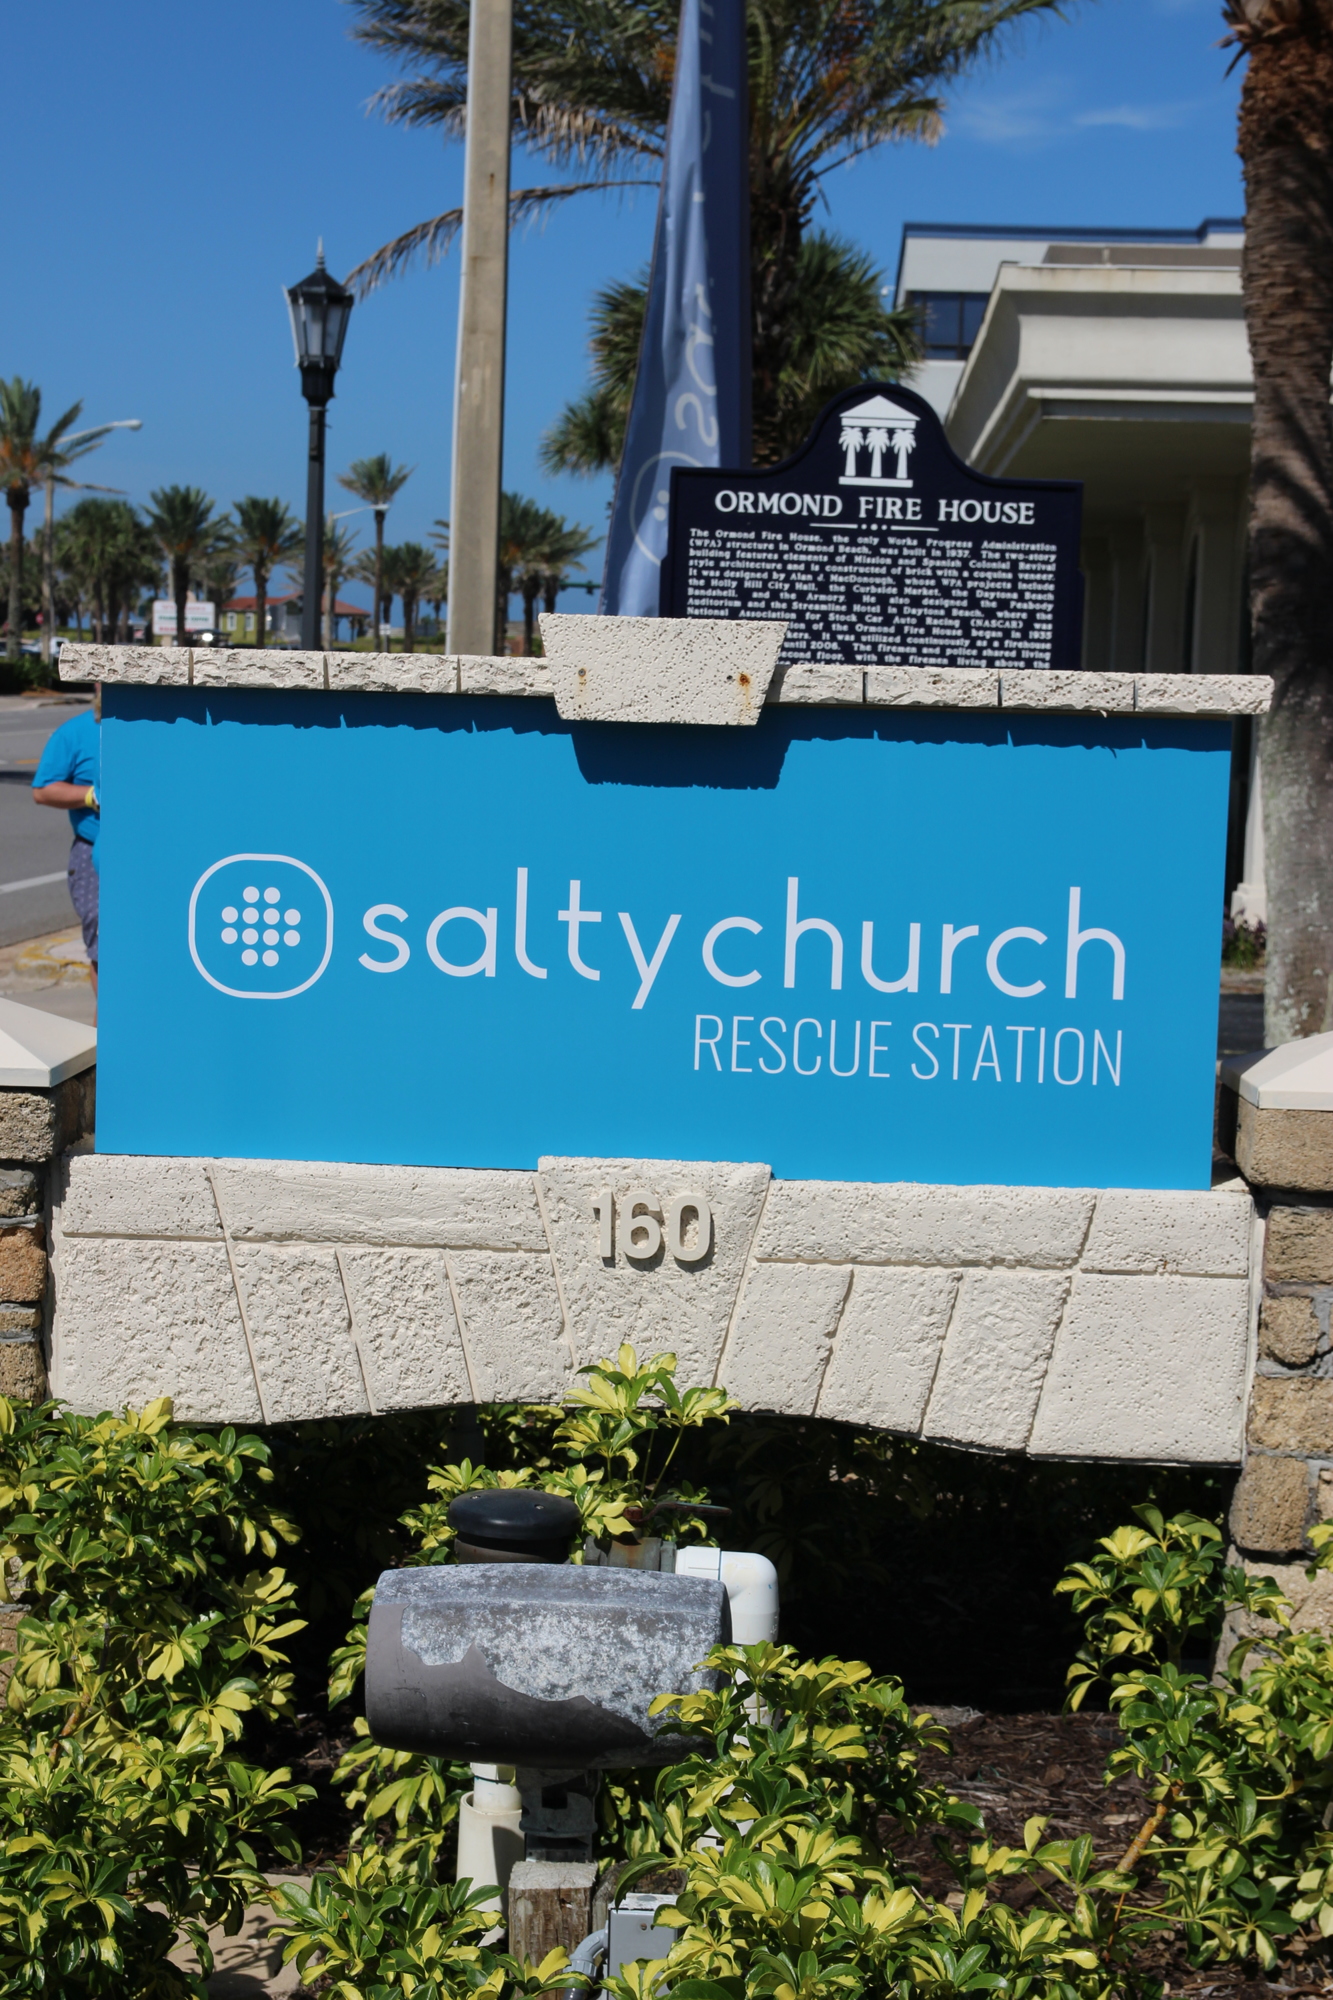 The Salty Church rescue station is located at 160 E. Granada Blvd. Photo by Jarleene Almenas